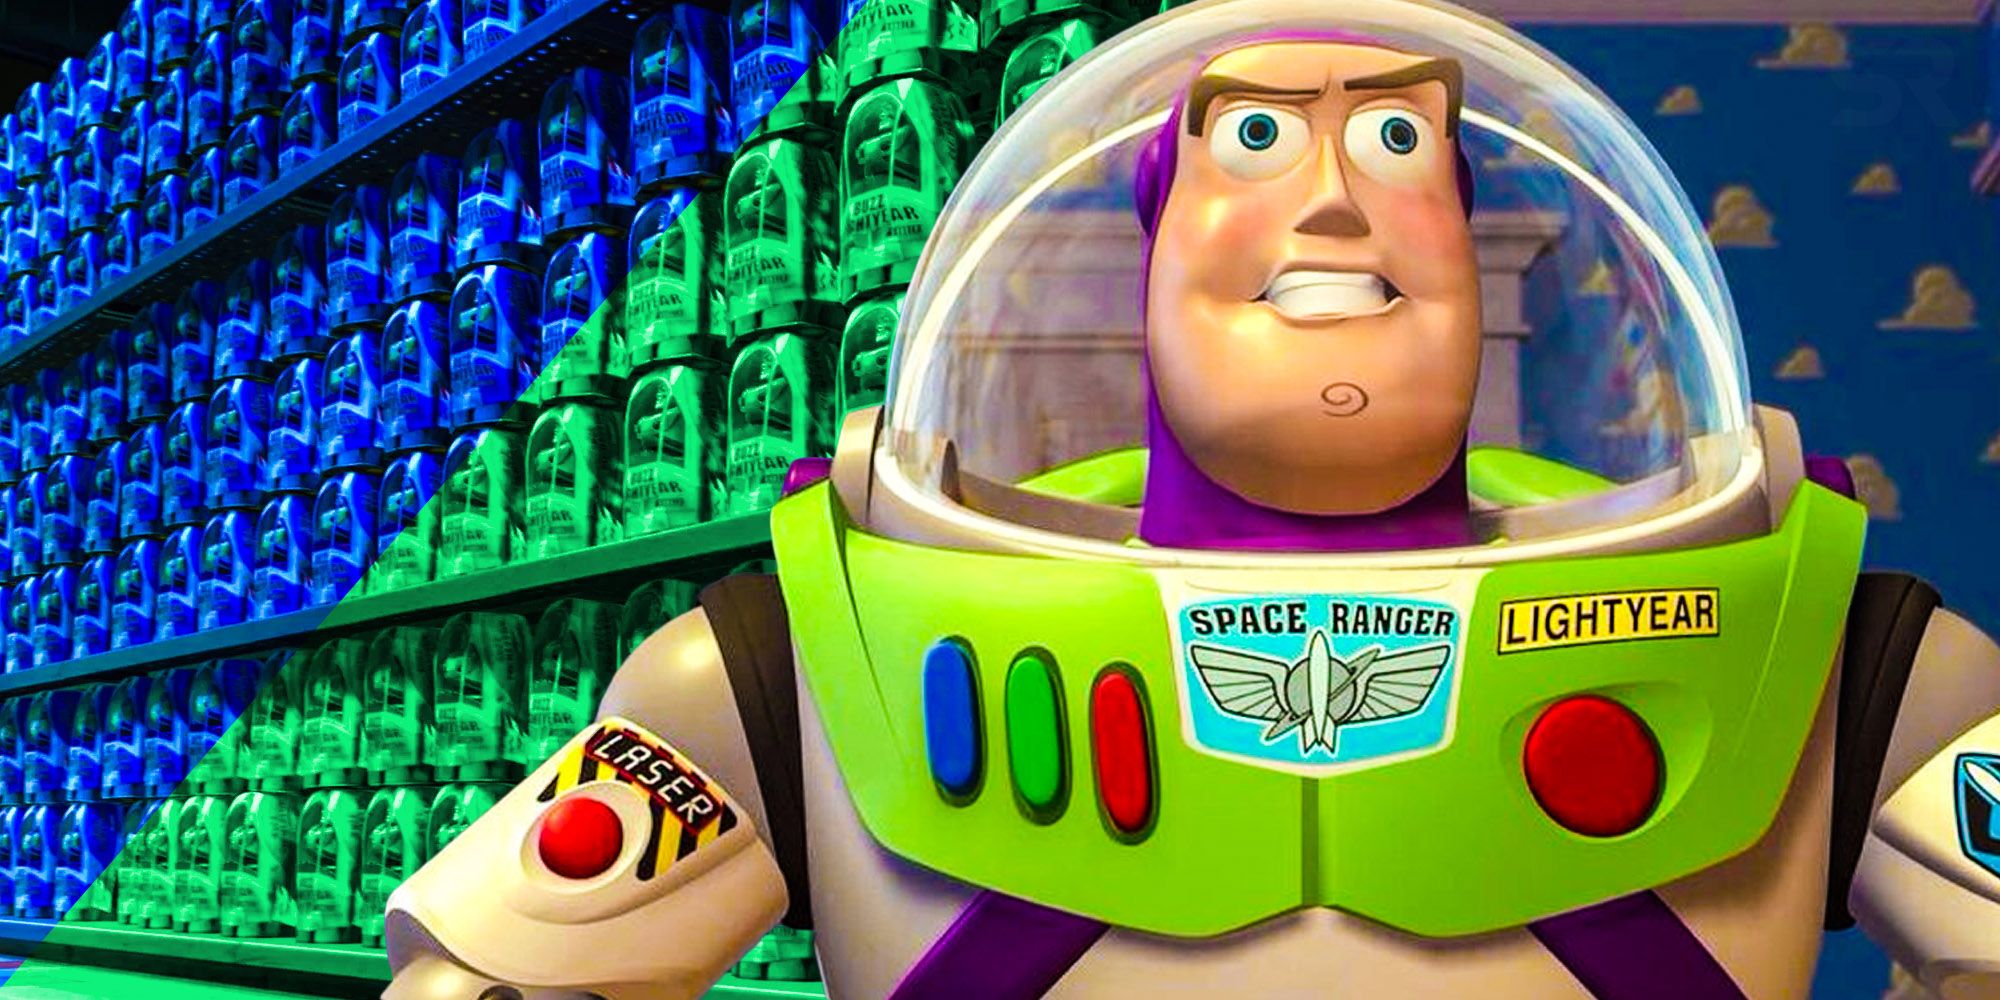 Buzz lightyear toy story why does he freeze despite not knowing he is a toy